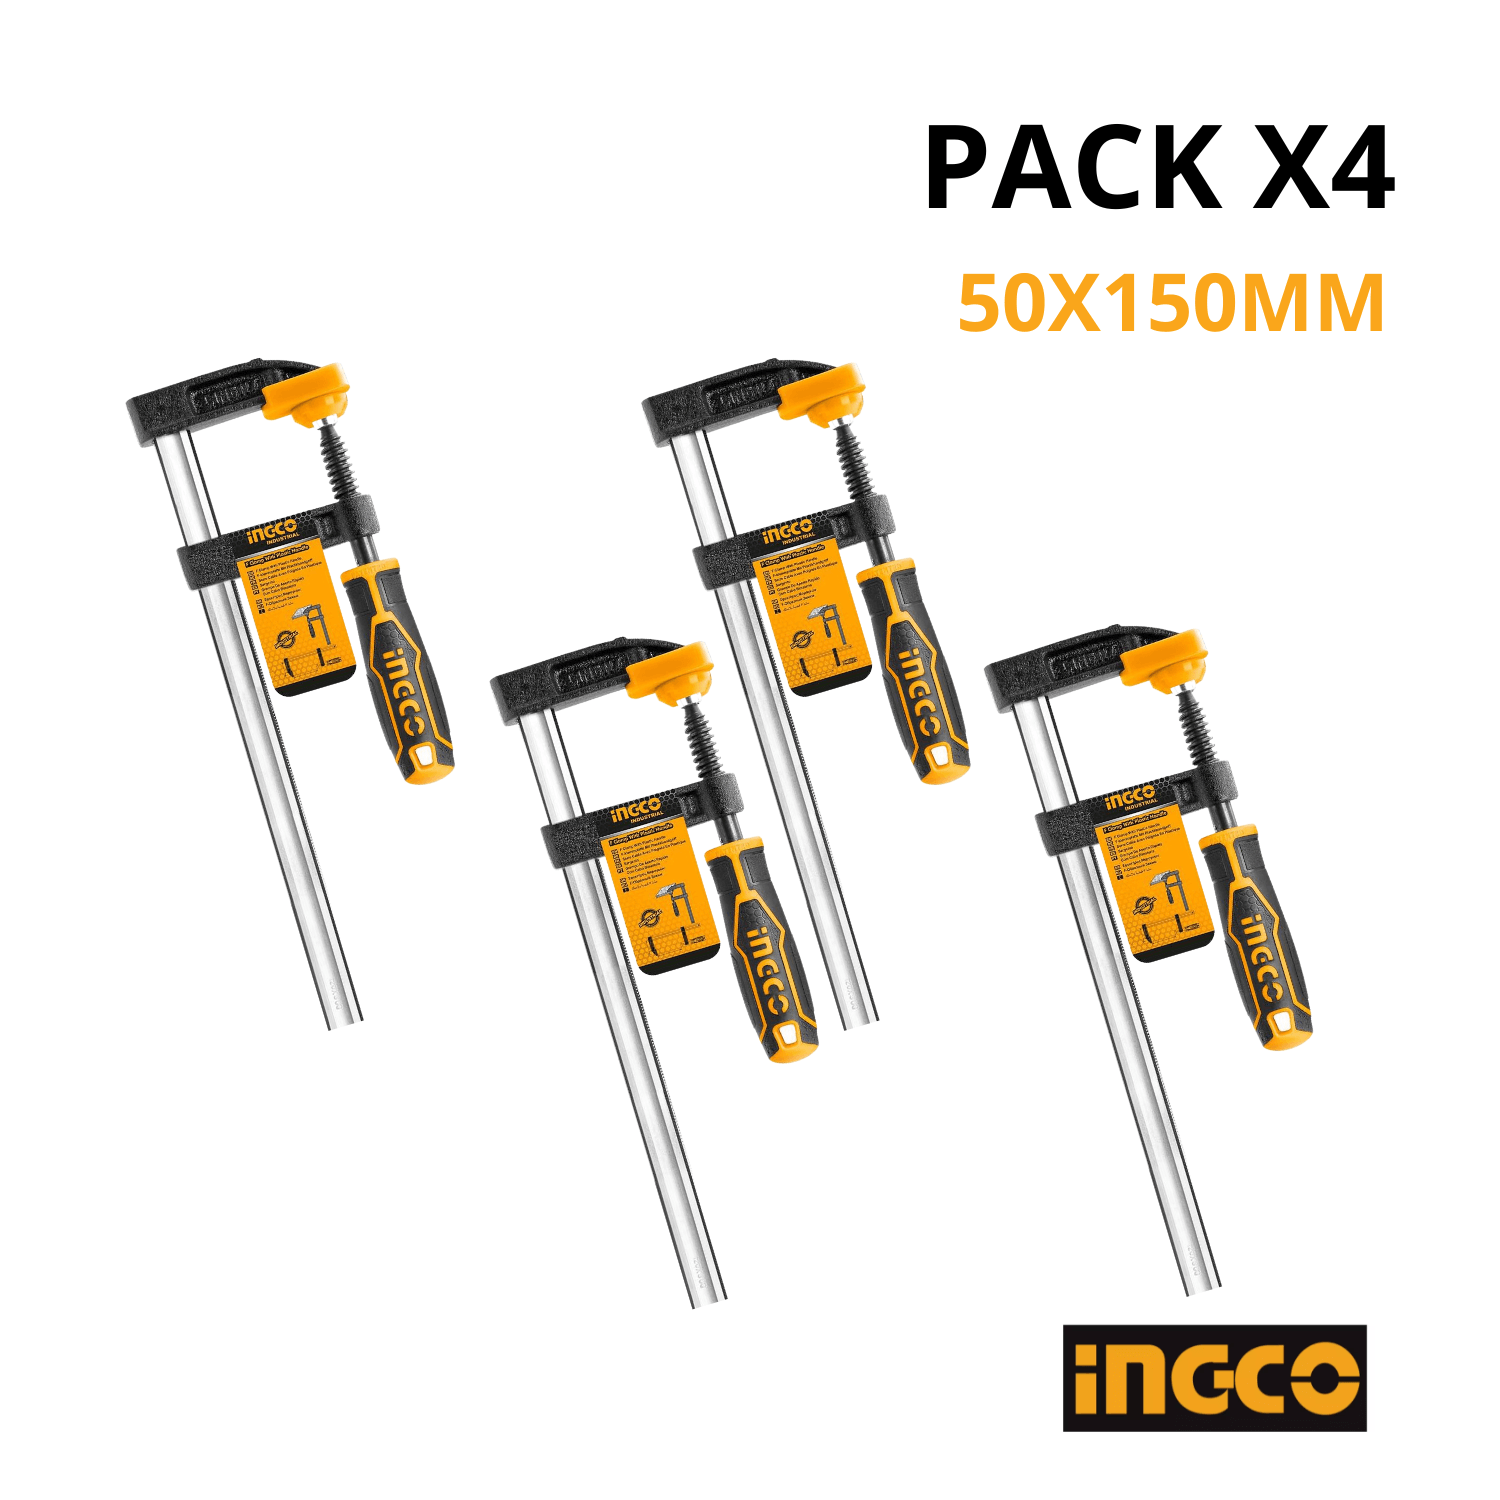 Pack x4 Prensa Sargento tipo F 50 x 150MM Industrial Ingco HFC020501- x4